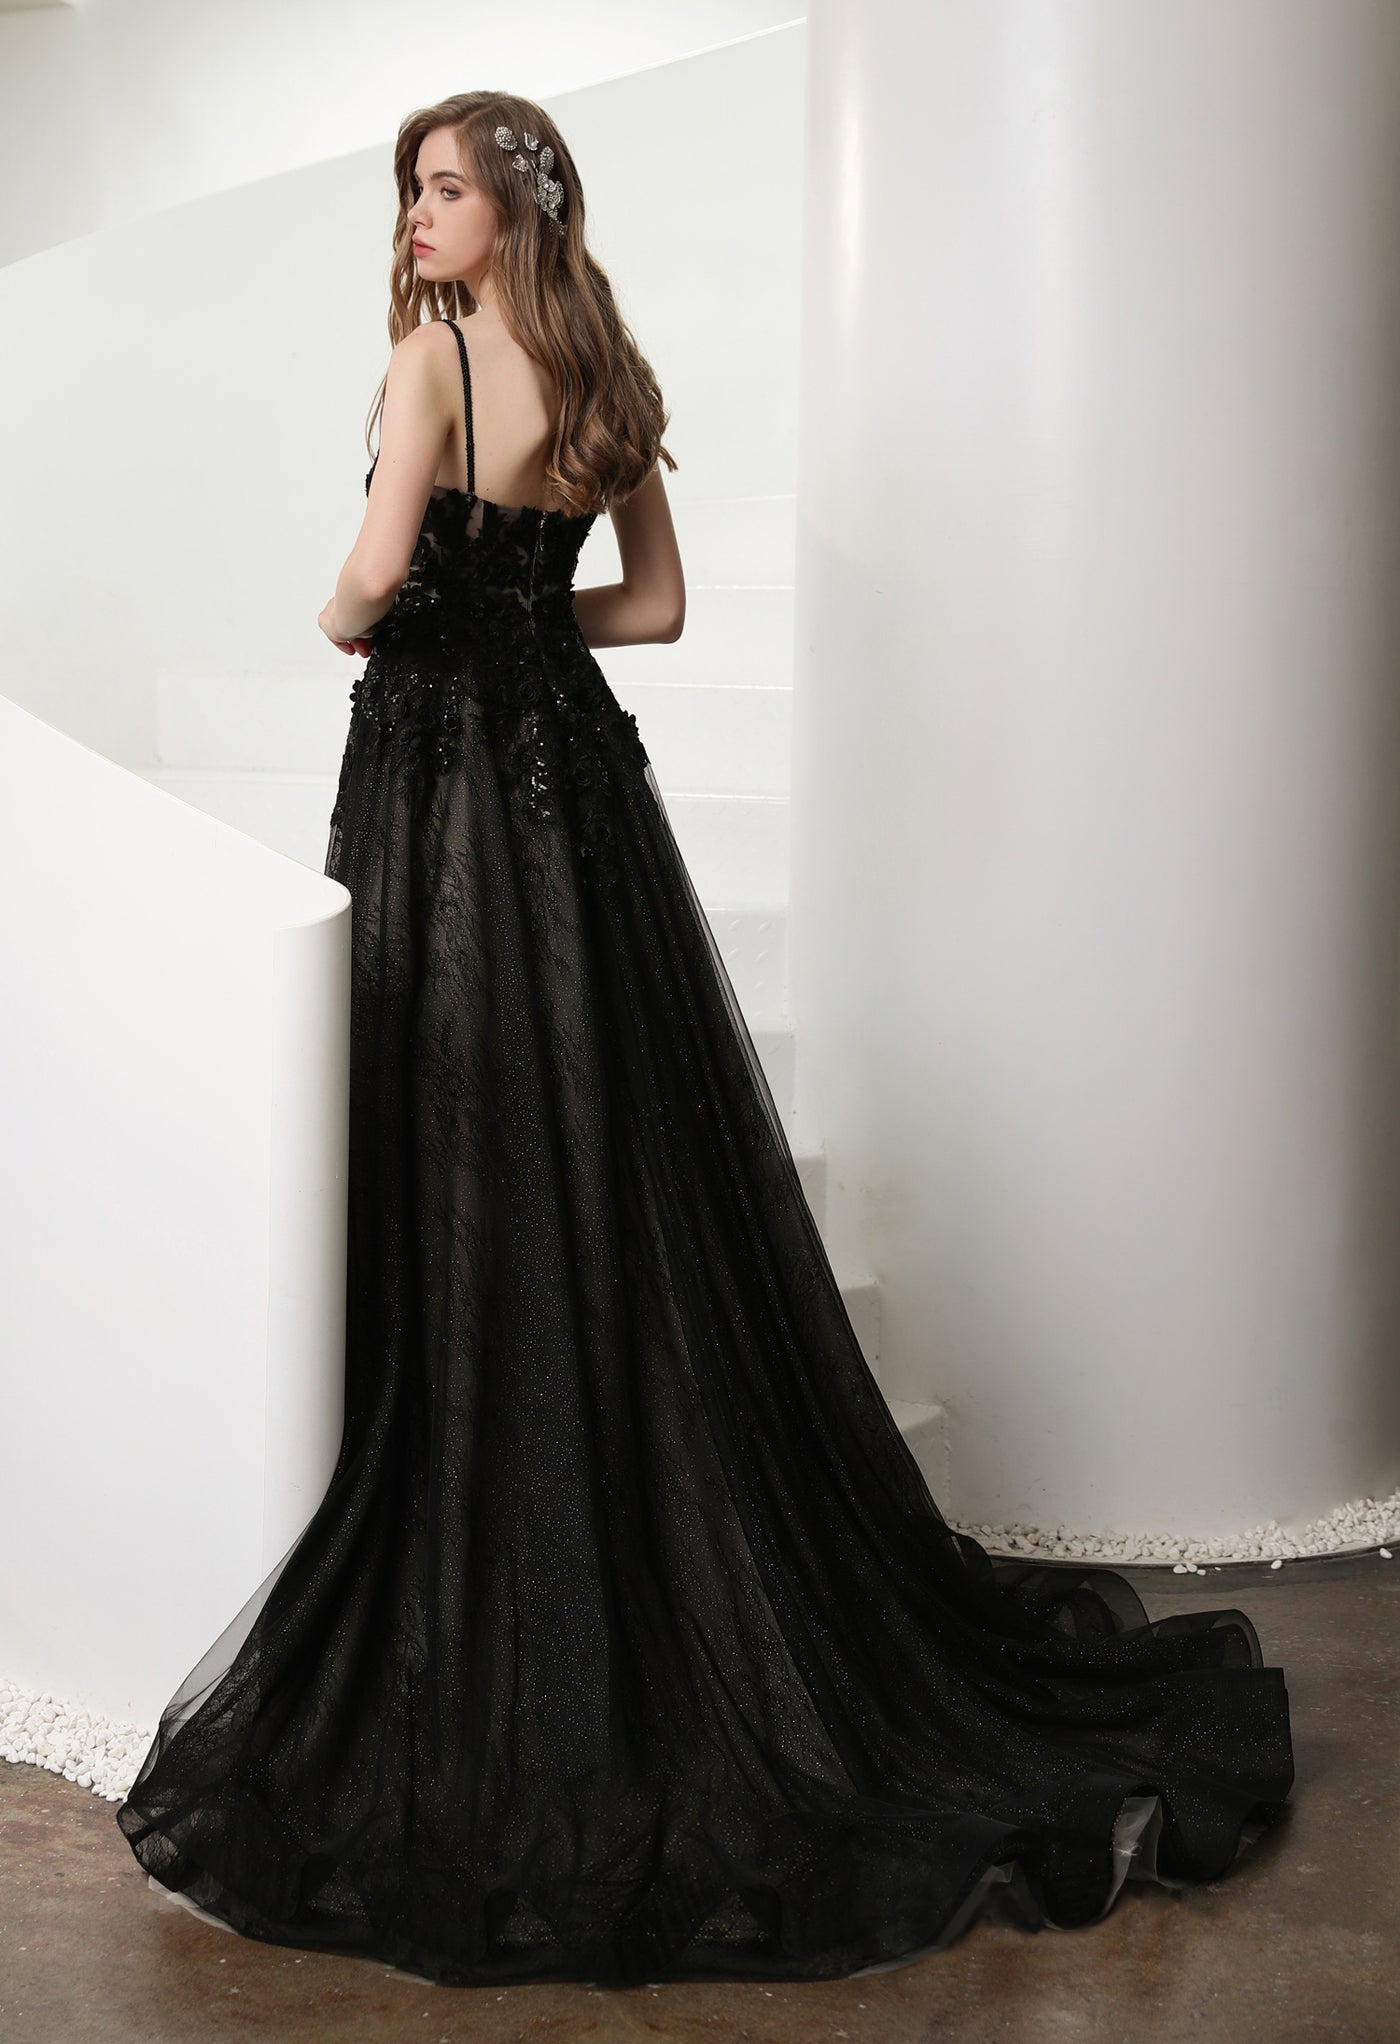 A bride in a Bergamot Bridal Black Illusion Lace Wedding Dress with Detachable Long Sleeves leaning on a staircase.